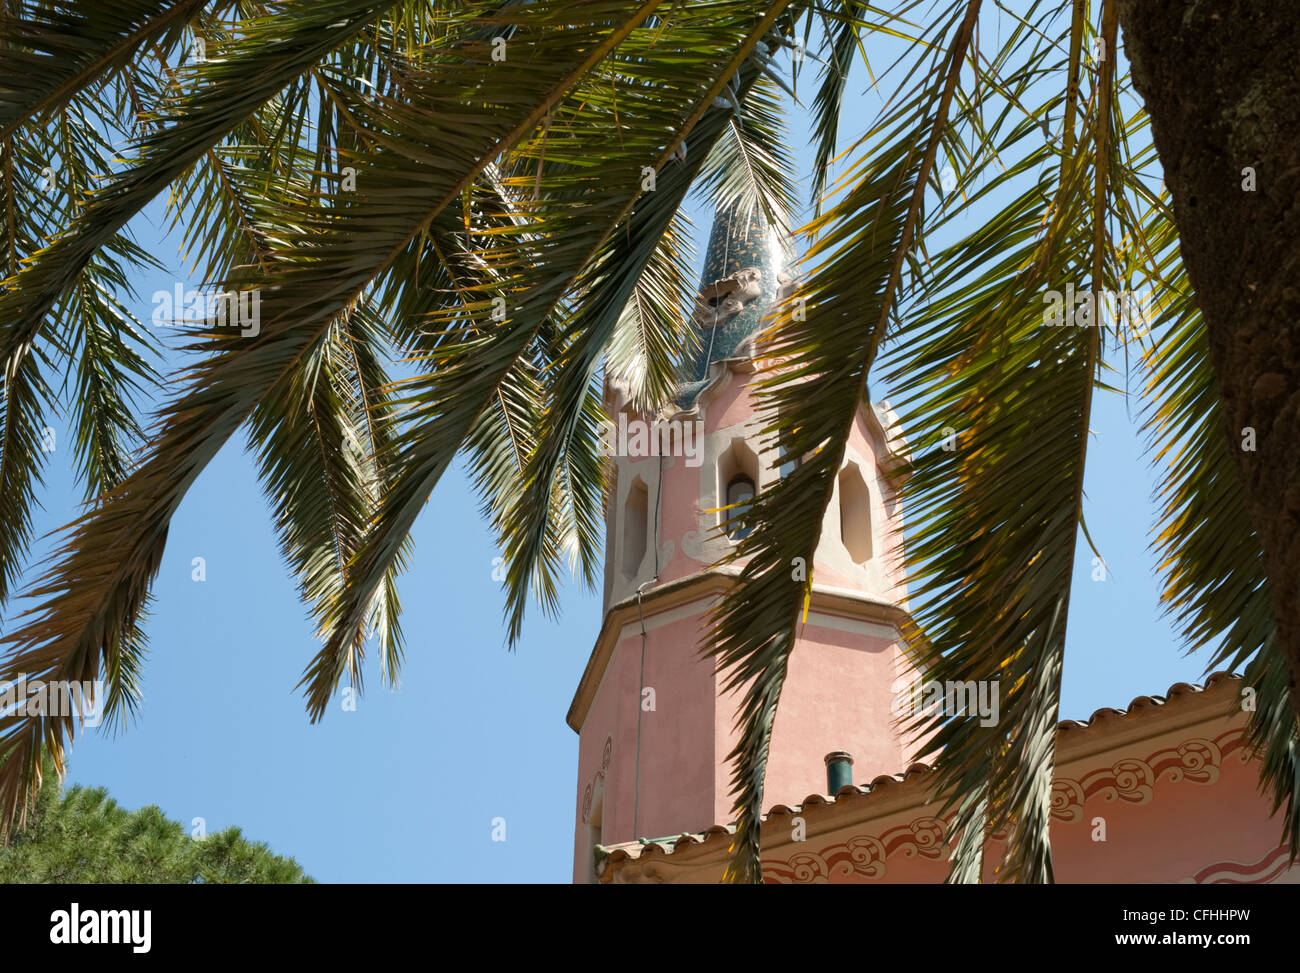 The Gaudi House Museum behind the leaves of a palm tree in Park Guell, Barcelona Stock Photo